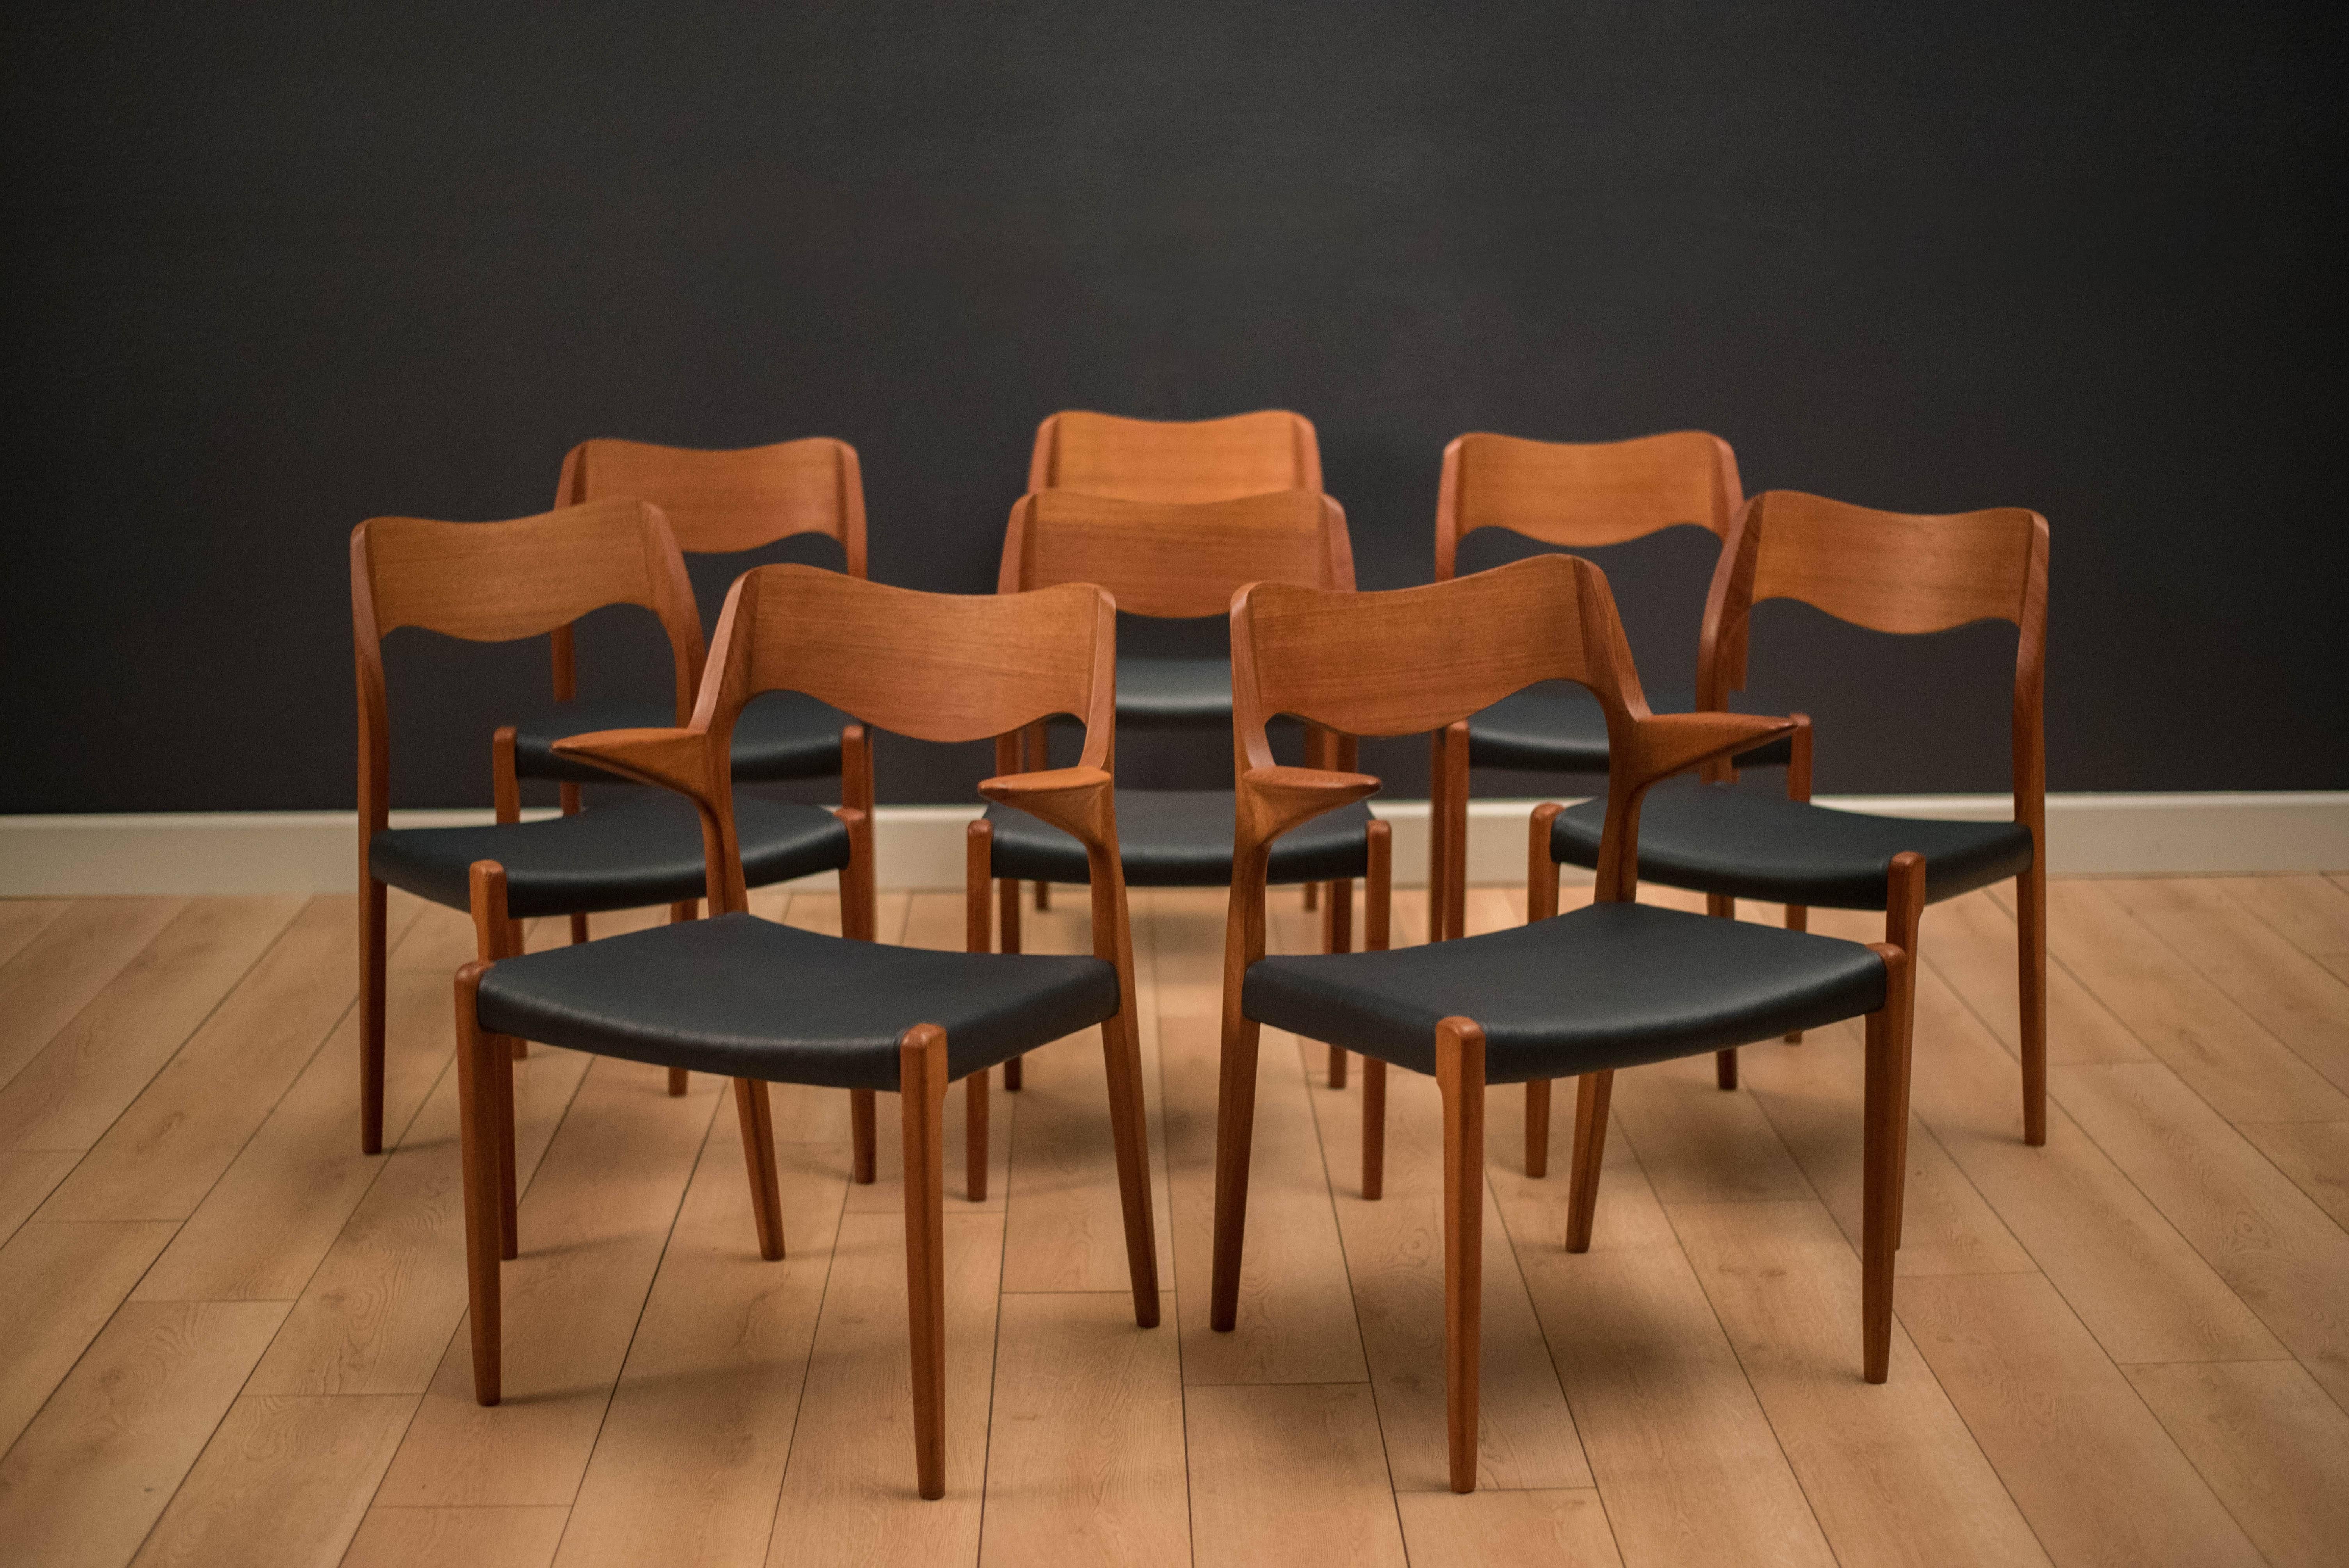 Mid century set of eight Danish dining chairs by Niels Møller for J.L. Møller Møbelfabrik in teak. This set includes six model 71 side chairs and two 55 armchairs. Seats have been professionally reupholstered in a navy blue leatherette. Price is for